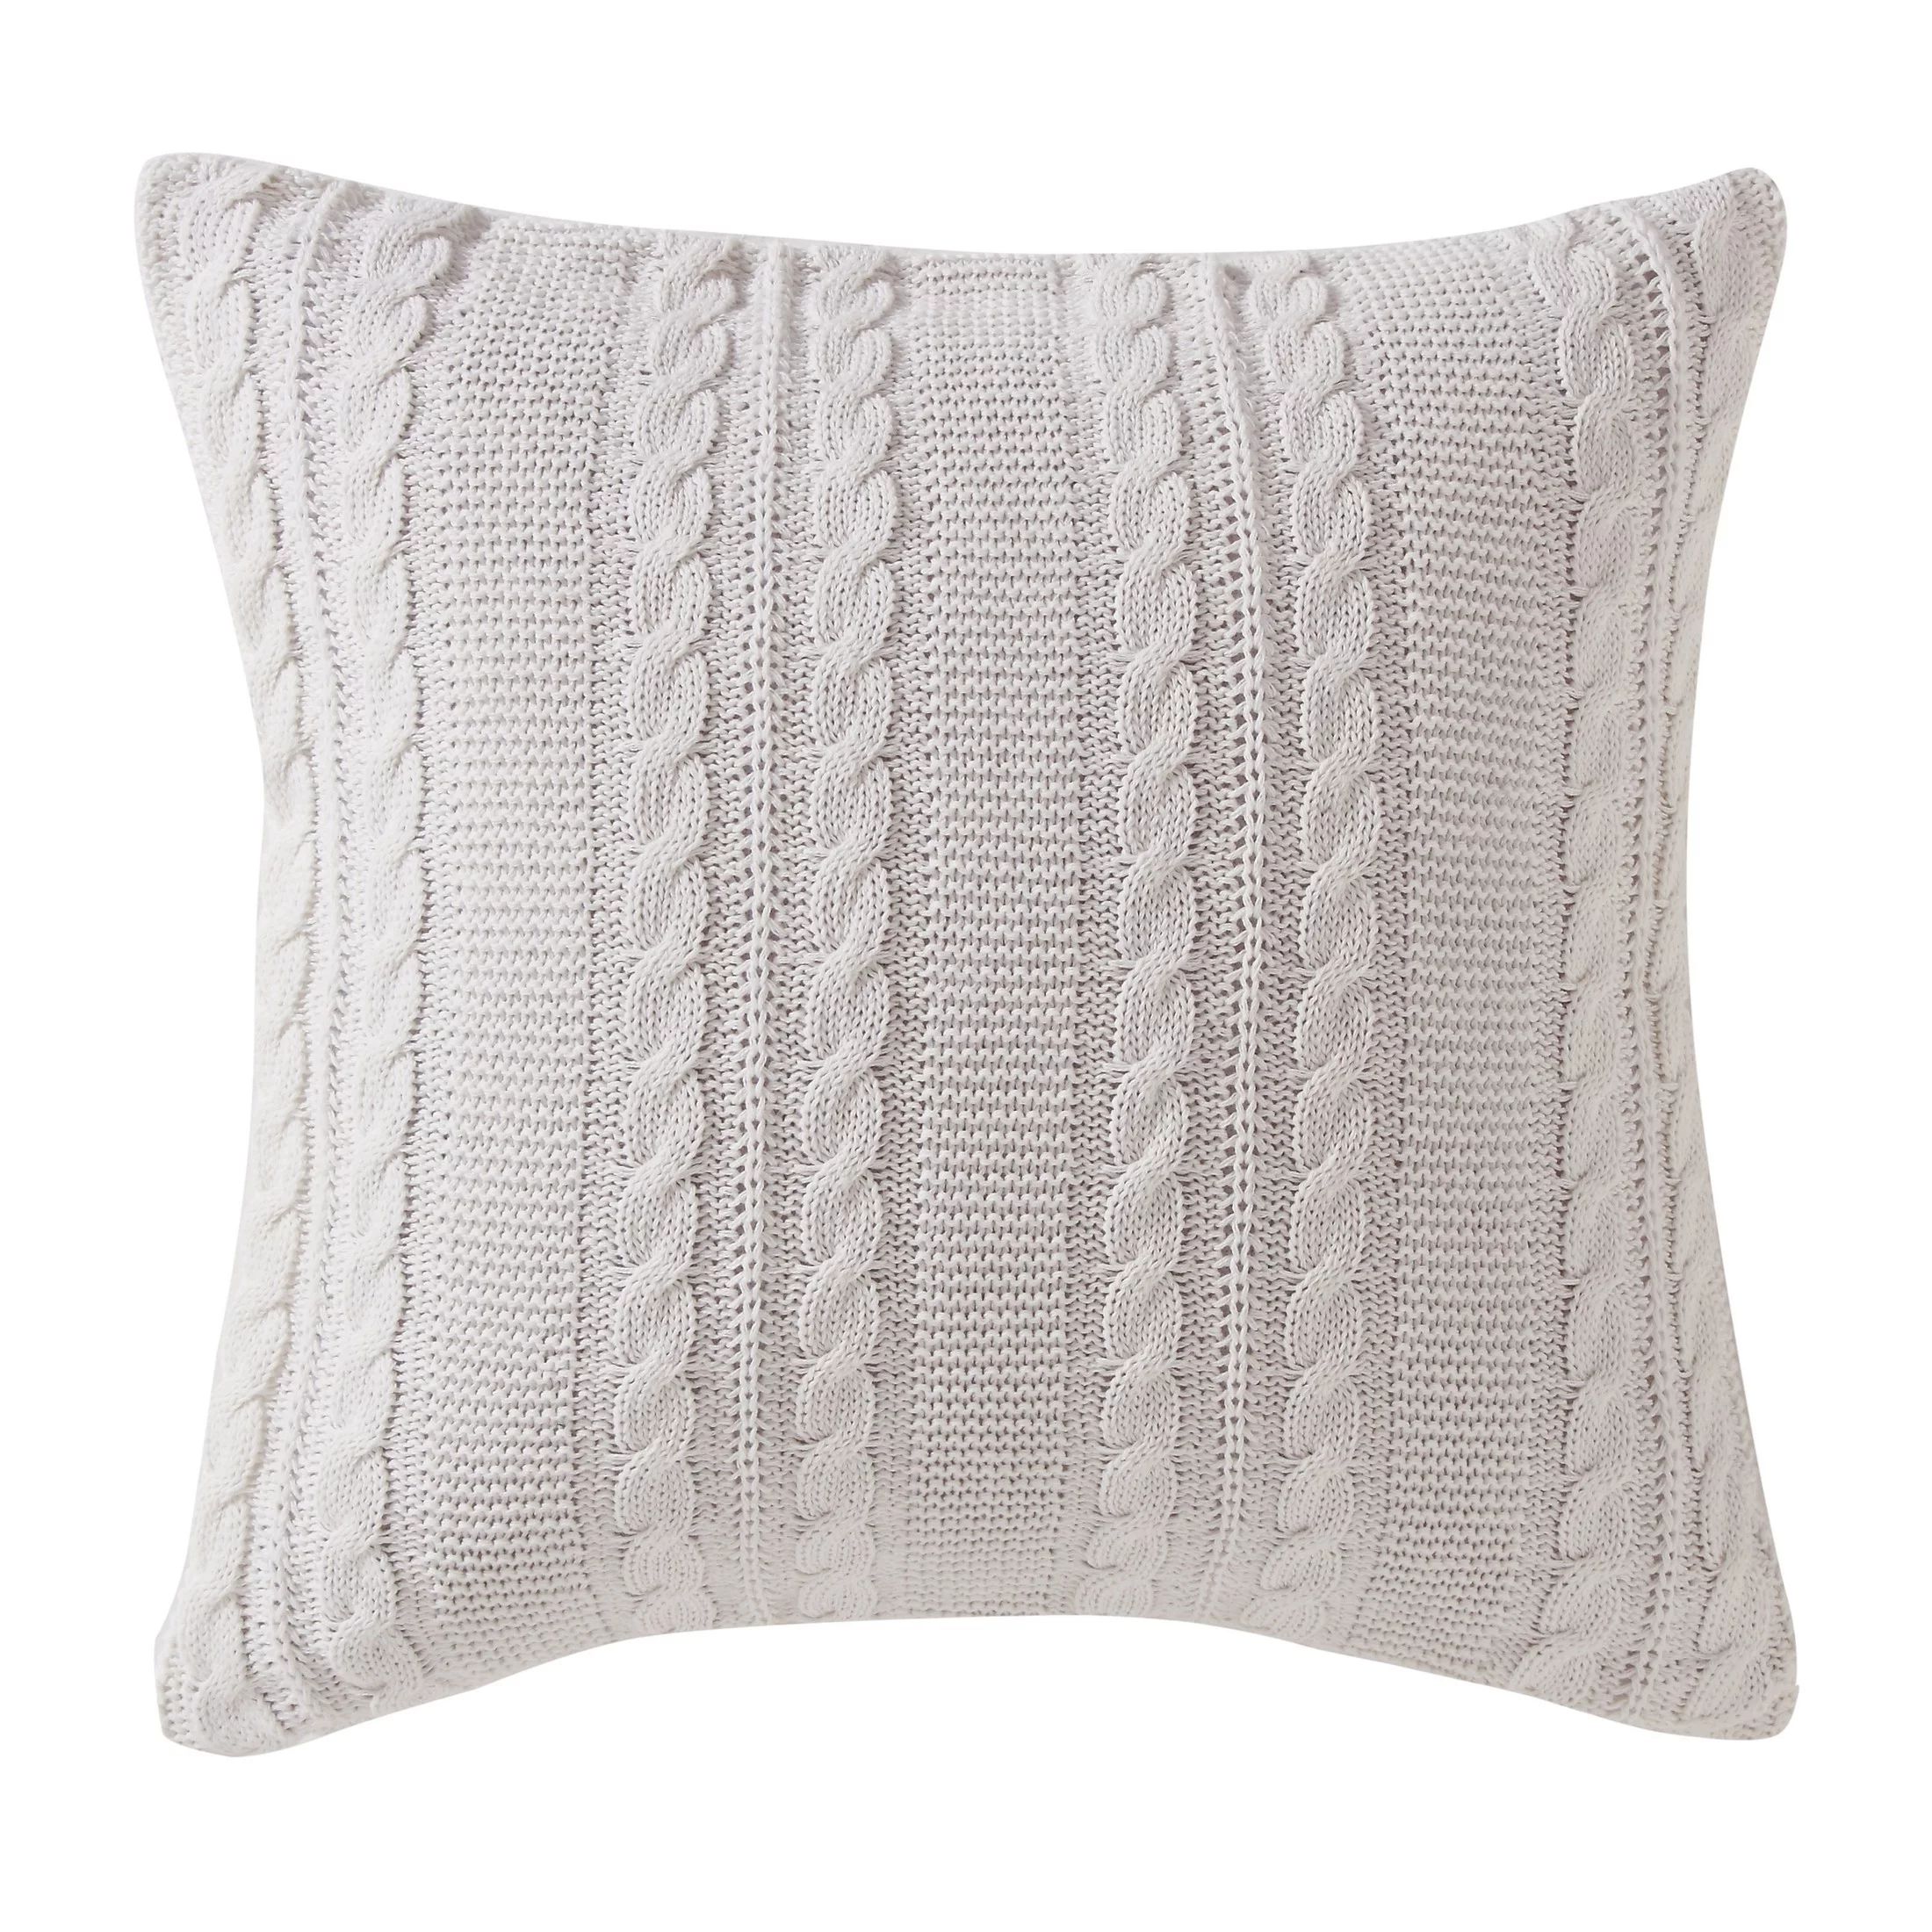 VCNY Home Dublin Cable Knit Square Decorative Throw Pillow, 18" x 18", White | Walmart (US)